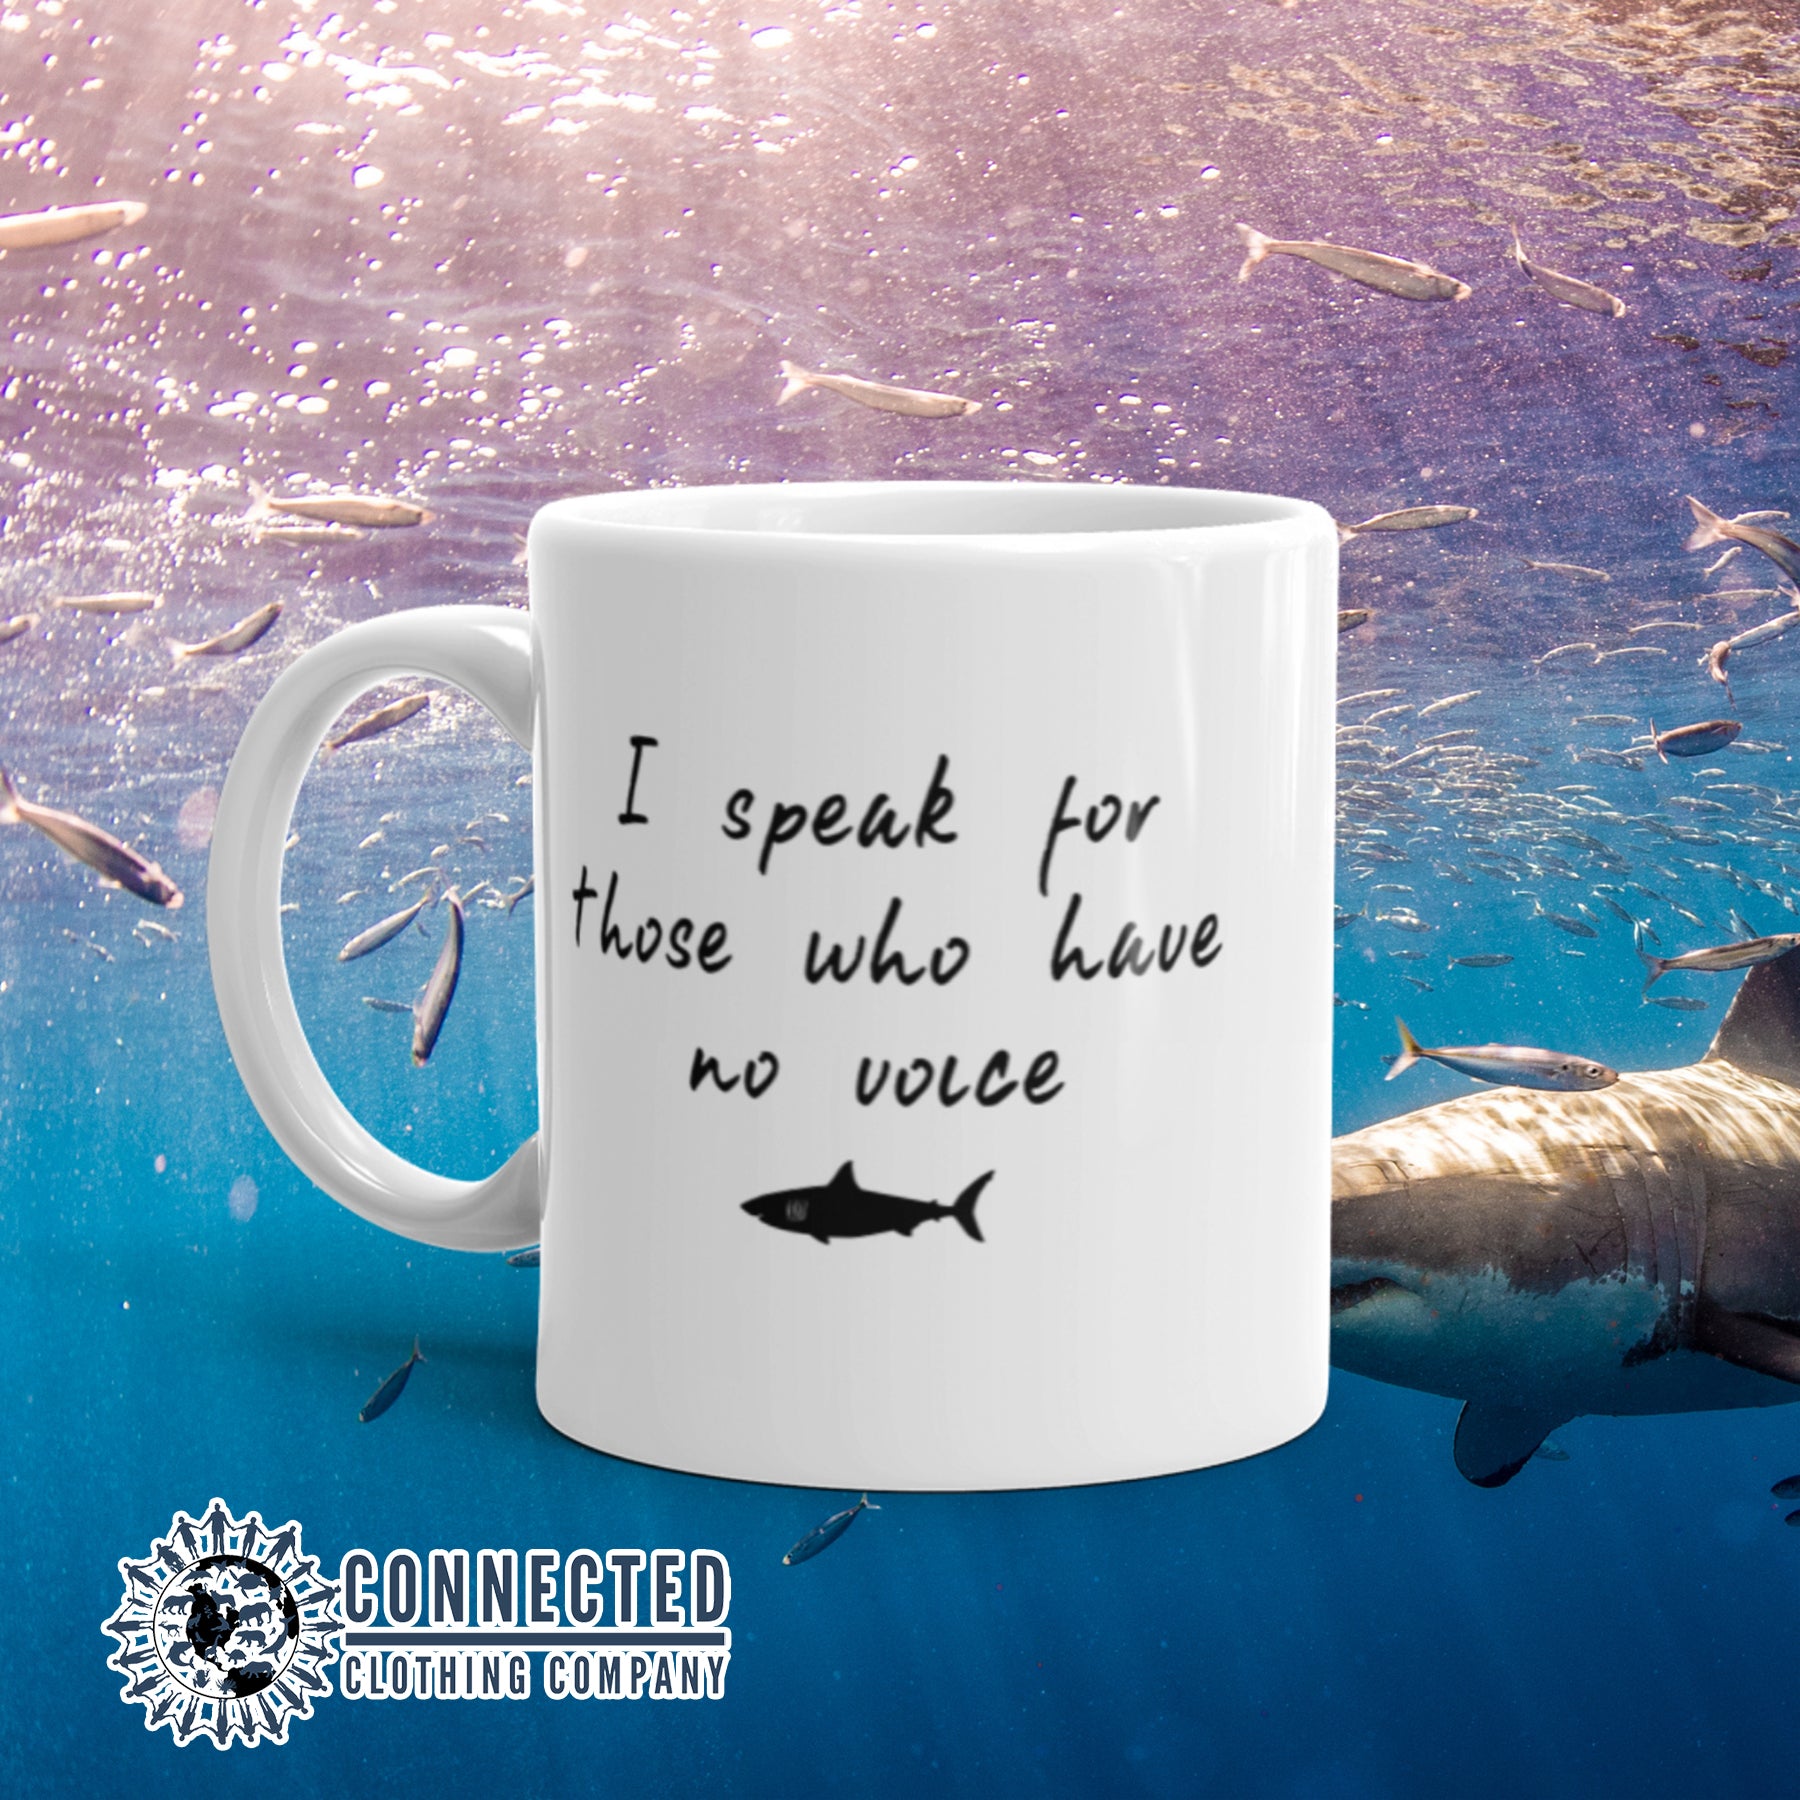 Be The Voice Shark Classic Mug reads "I speak for those who have no voice." - Connected Clothing Company - Ethically and Sustainably Made - 10% donated to Oceana shark conservation